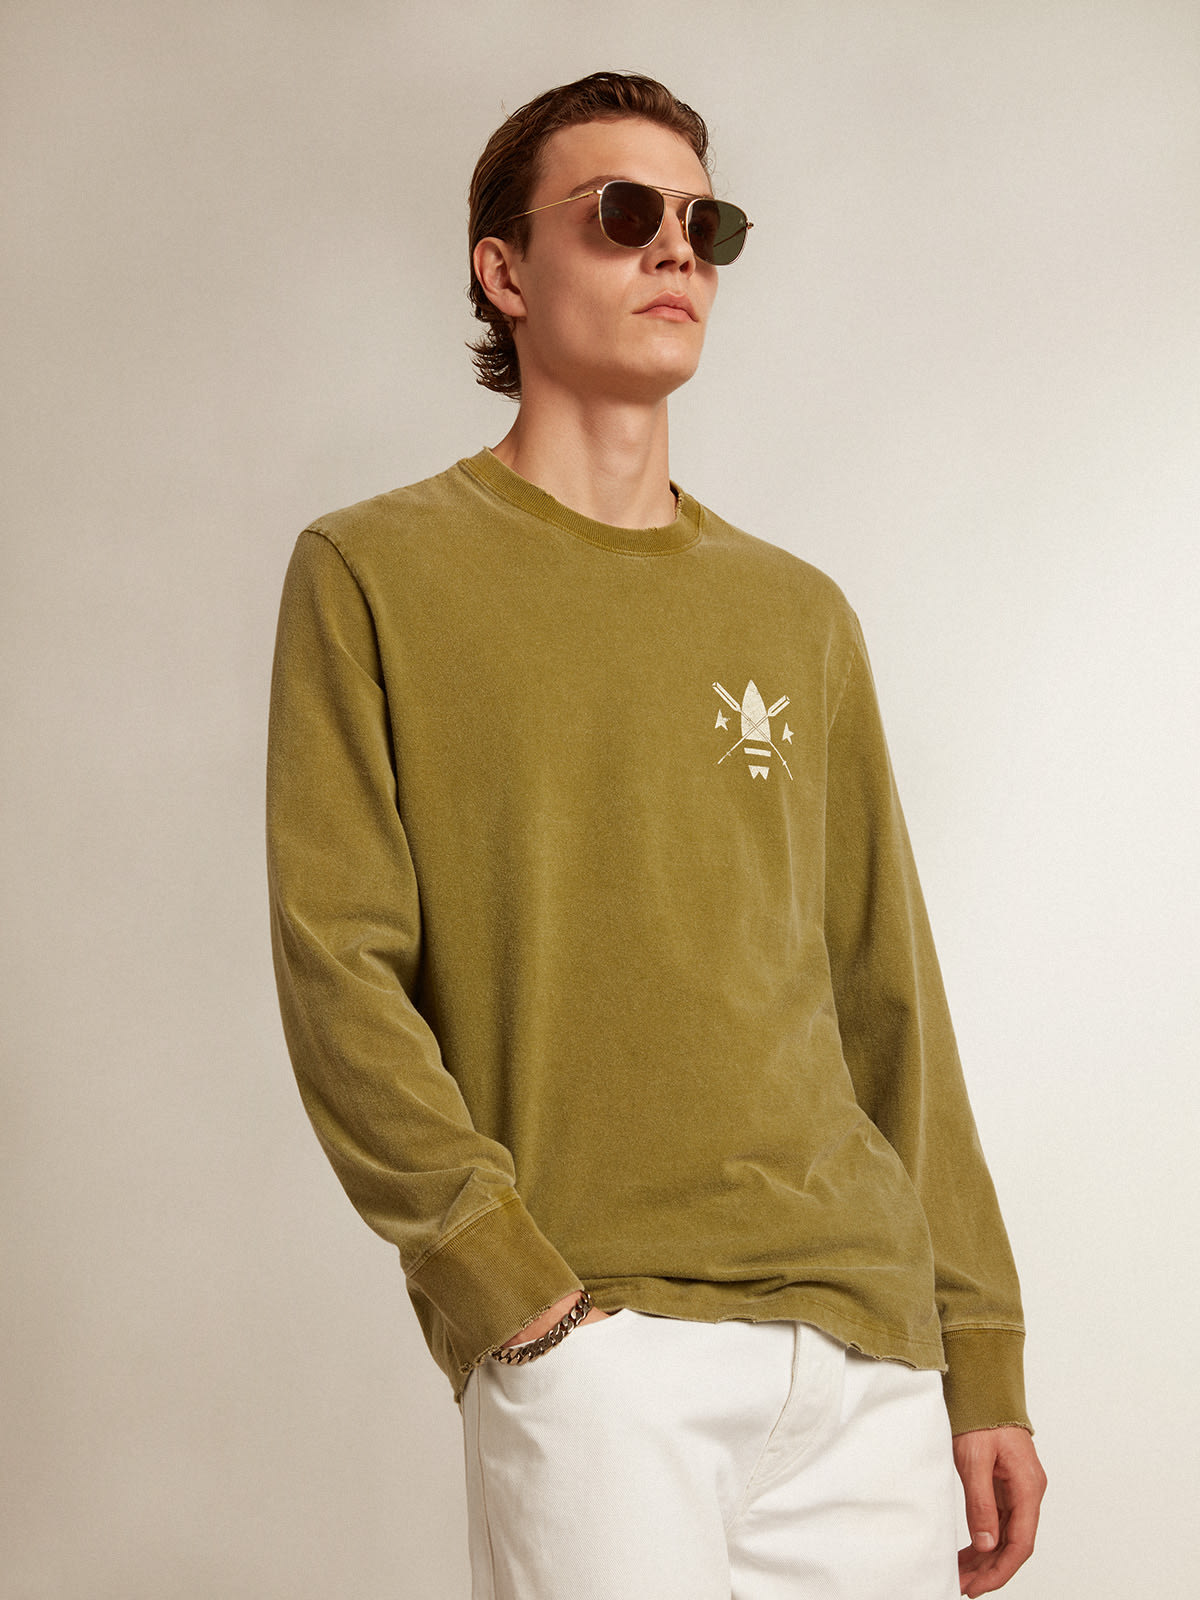 Golden Goose - Pesto-green T-shirt with white logo on the front and back in 